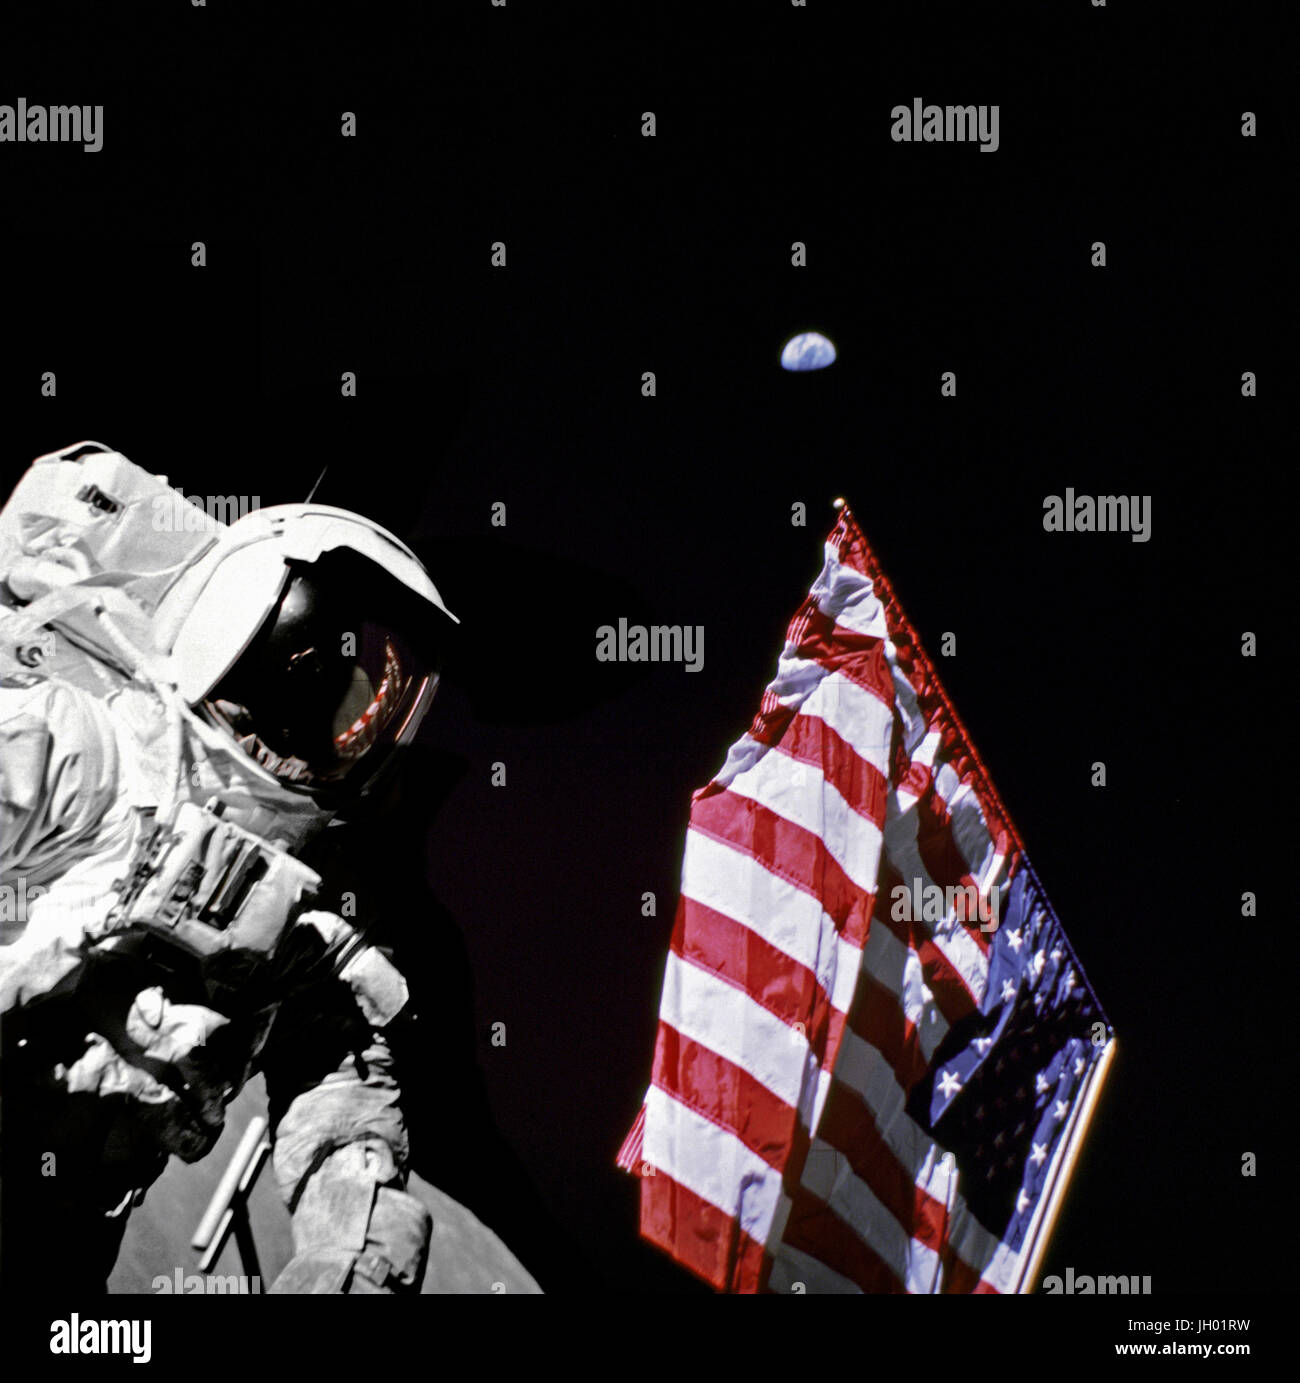 Geologist-Astronaut Harrison Schmitt, Apollo 17 Lunar Module pilot, is photographed next to the American Flag during extravehicular activity (EVA) of NASA's final lunar landing mission in the Apollo series. The photo was taken at the Taurus-Littrow landing site. The highest part of the flag appears to point toward our planet earth in the distant background. Photographer: NASA / Eugene Cernan Stock Photo